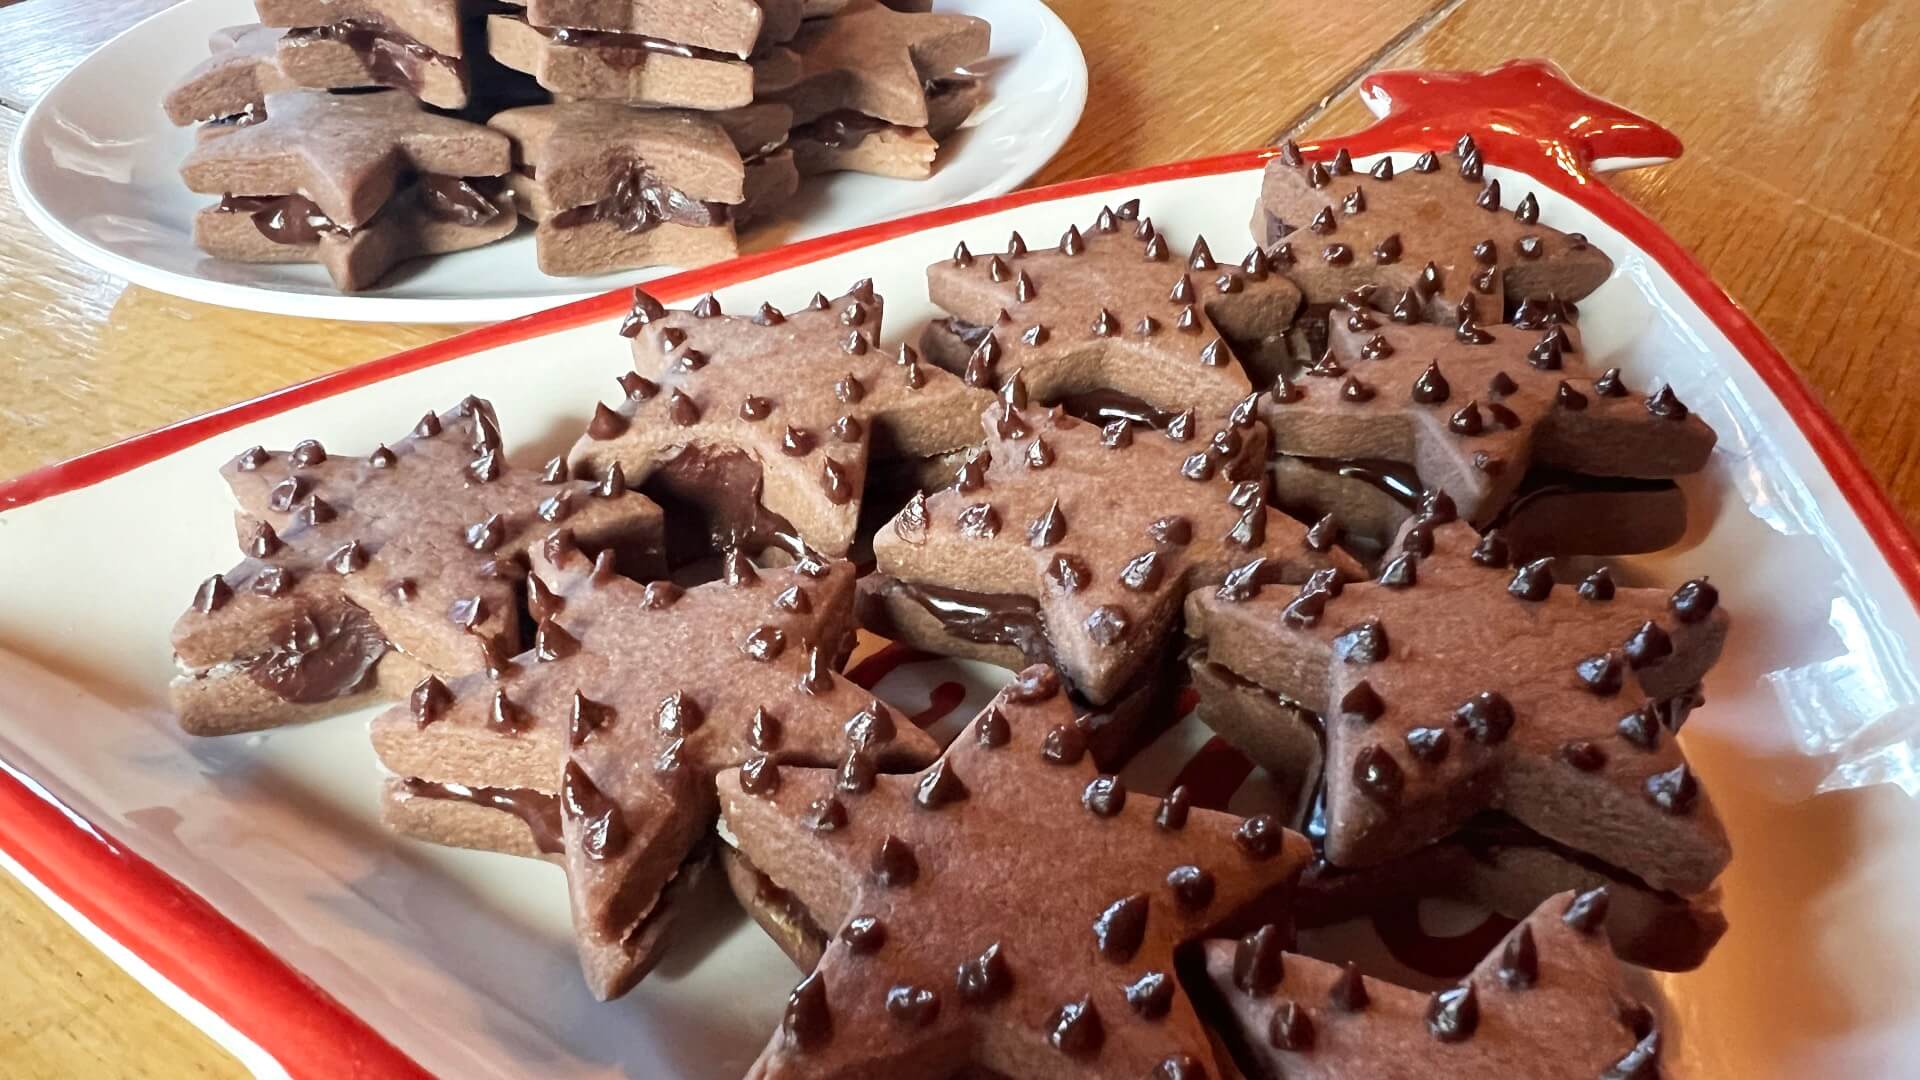 Plates filled with chocolate sandwich cookies with a fudgey filling.